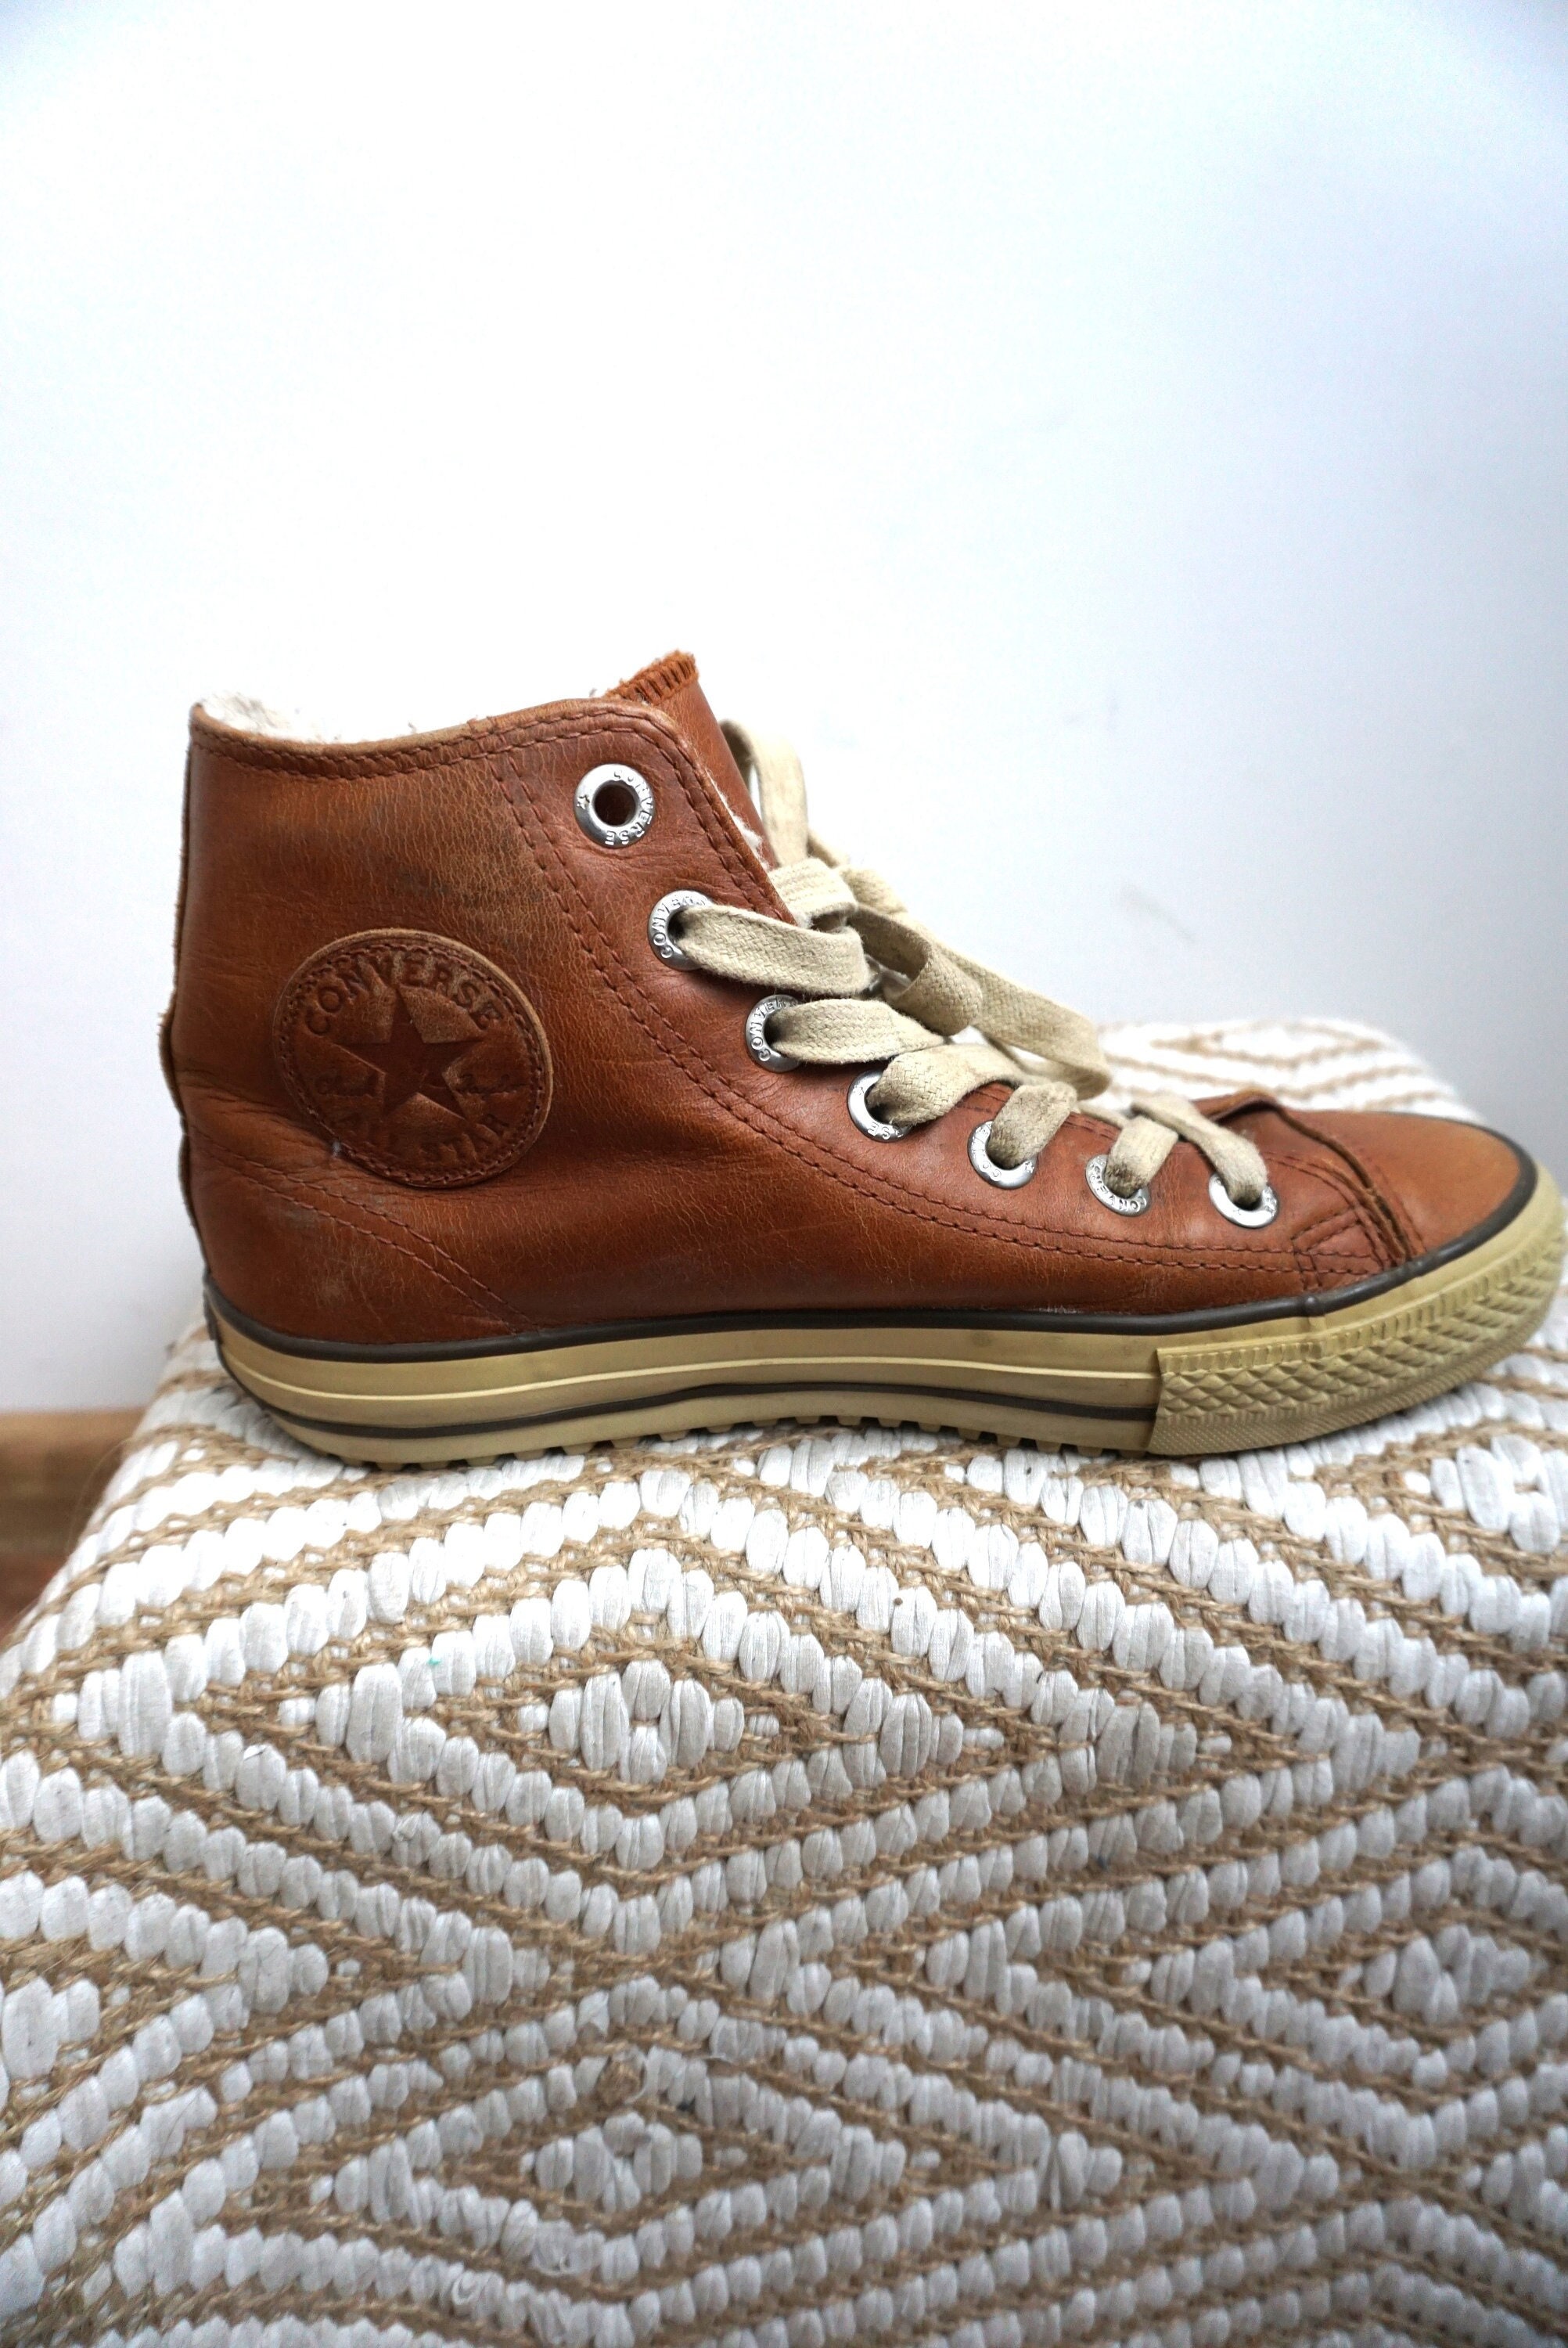 Vintage Brown Converse Boots / Sneakers / Warm Etsy